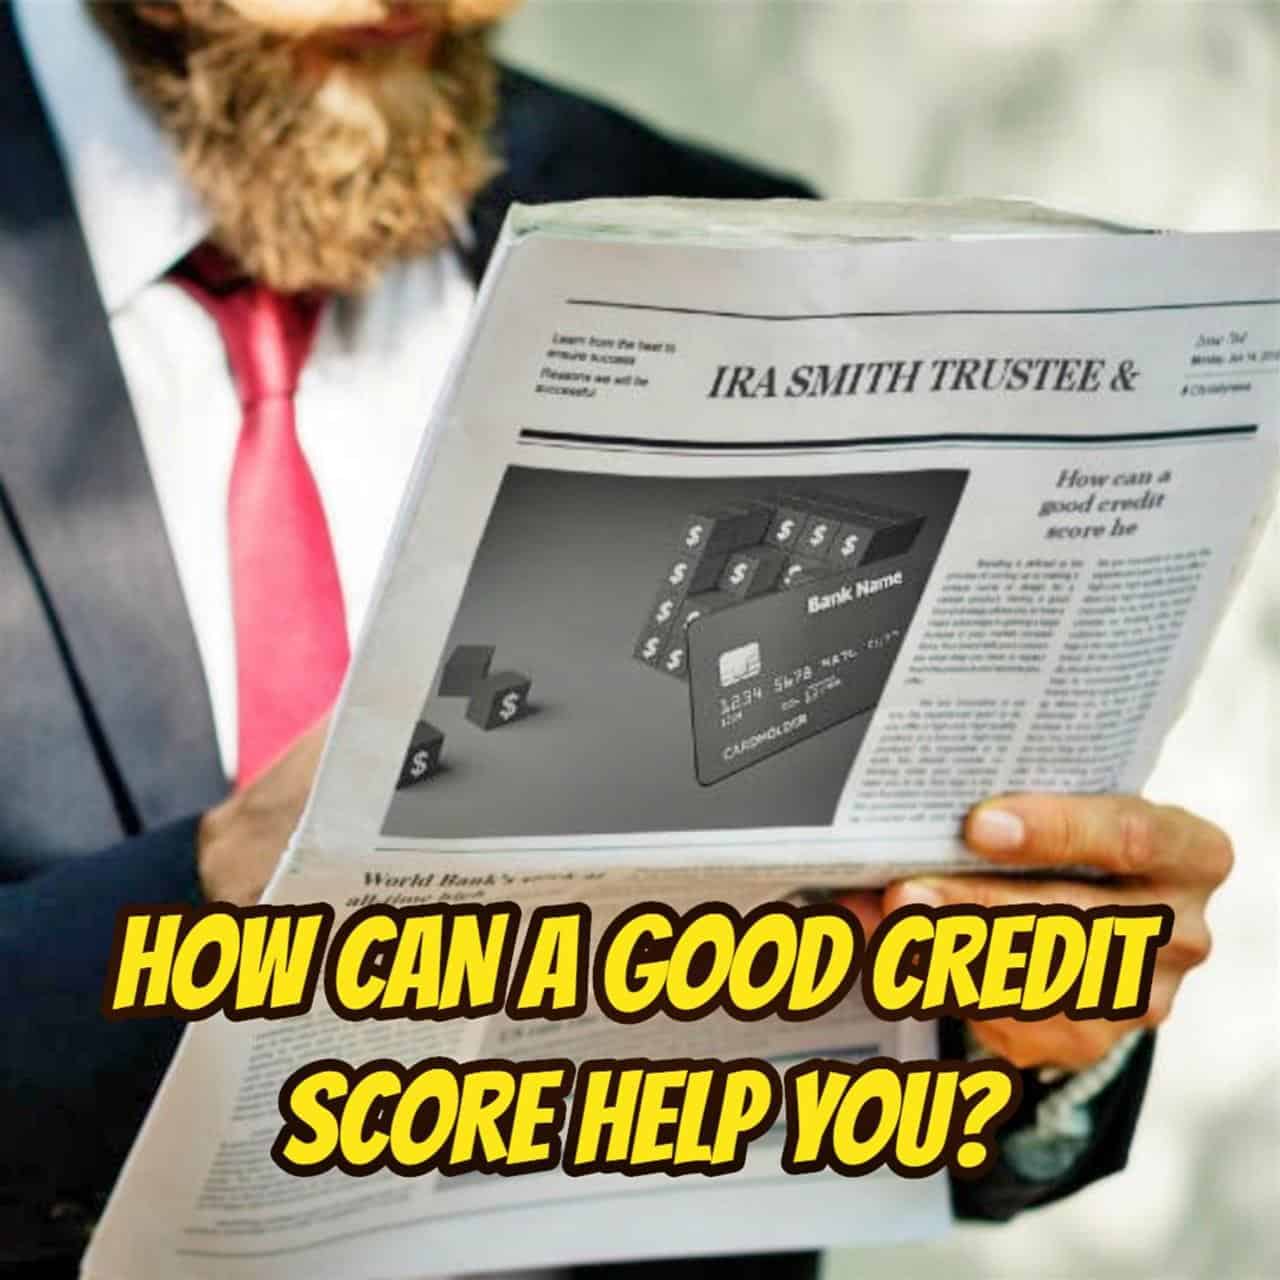 HOW CAN A GOOD CREDIT SCORE HELP YOU 0